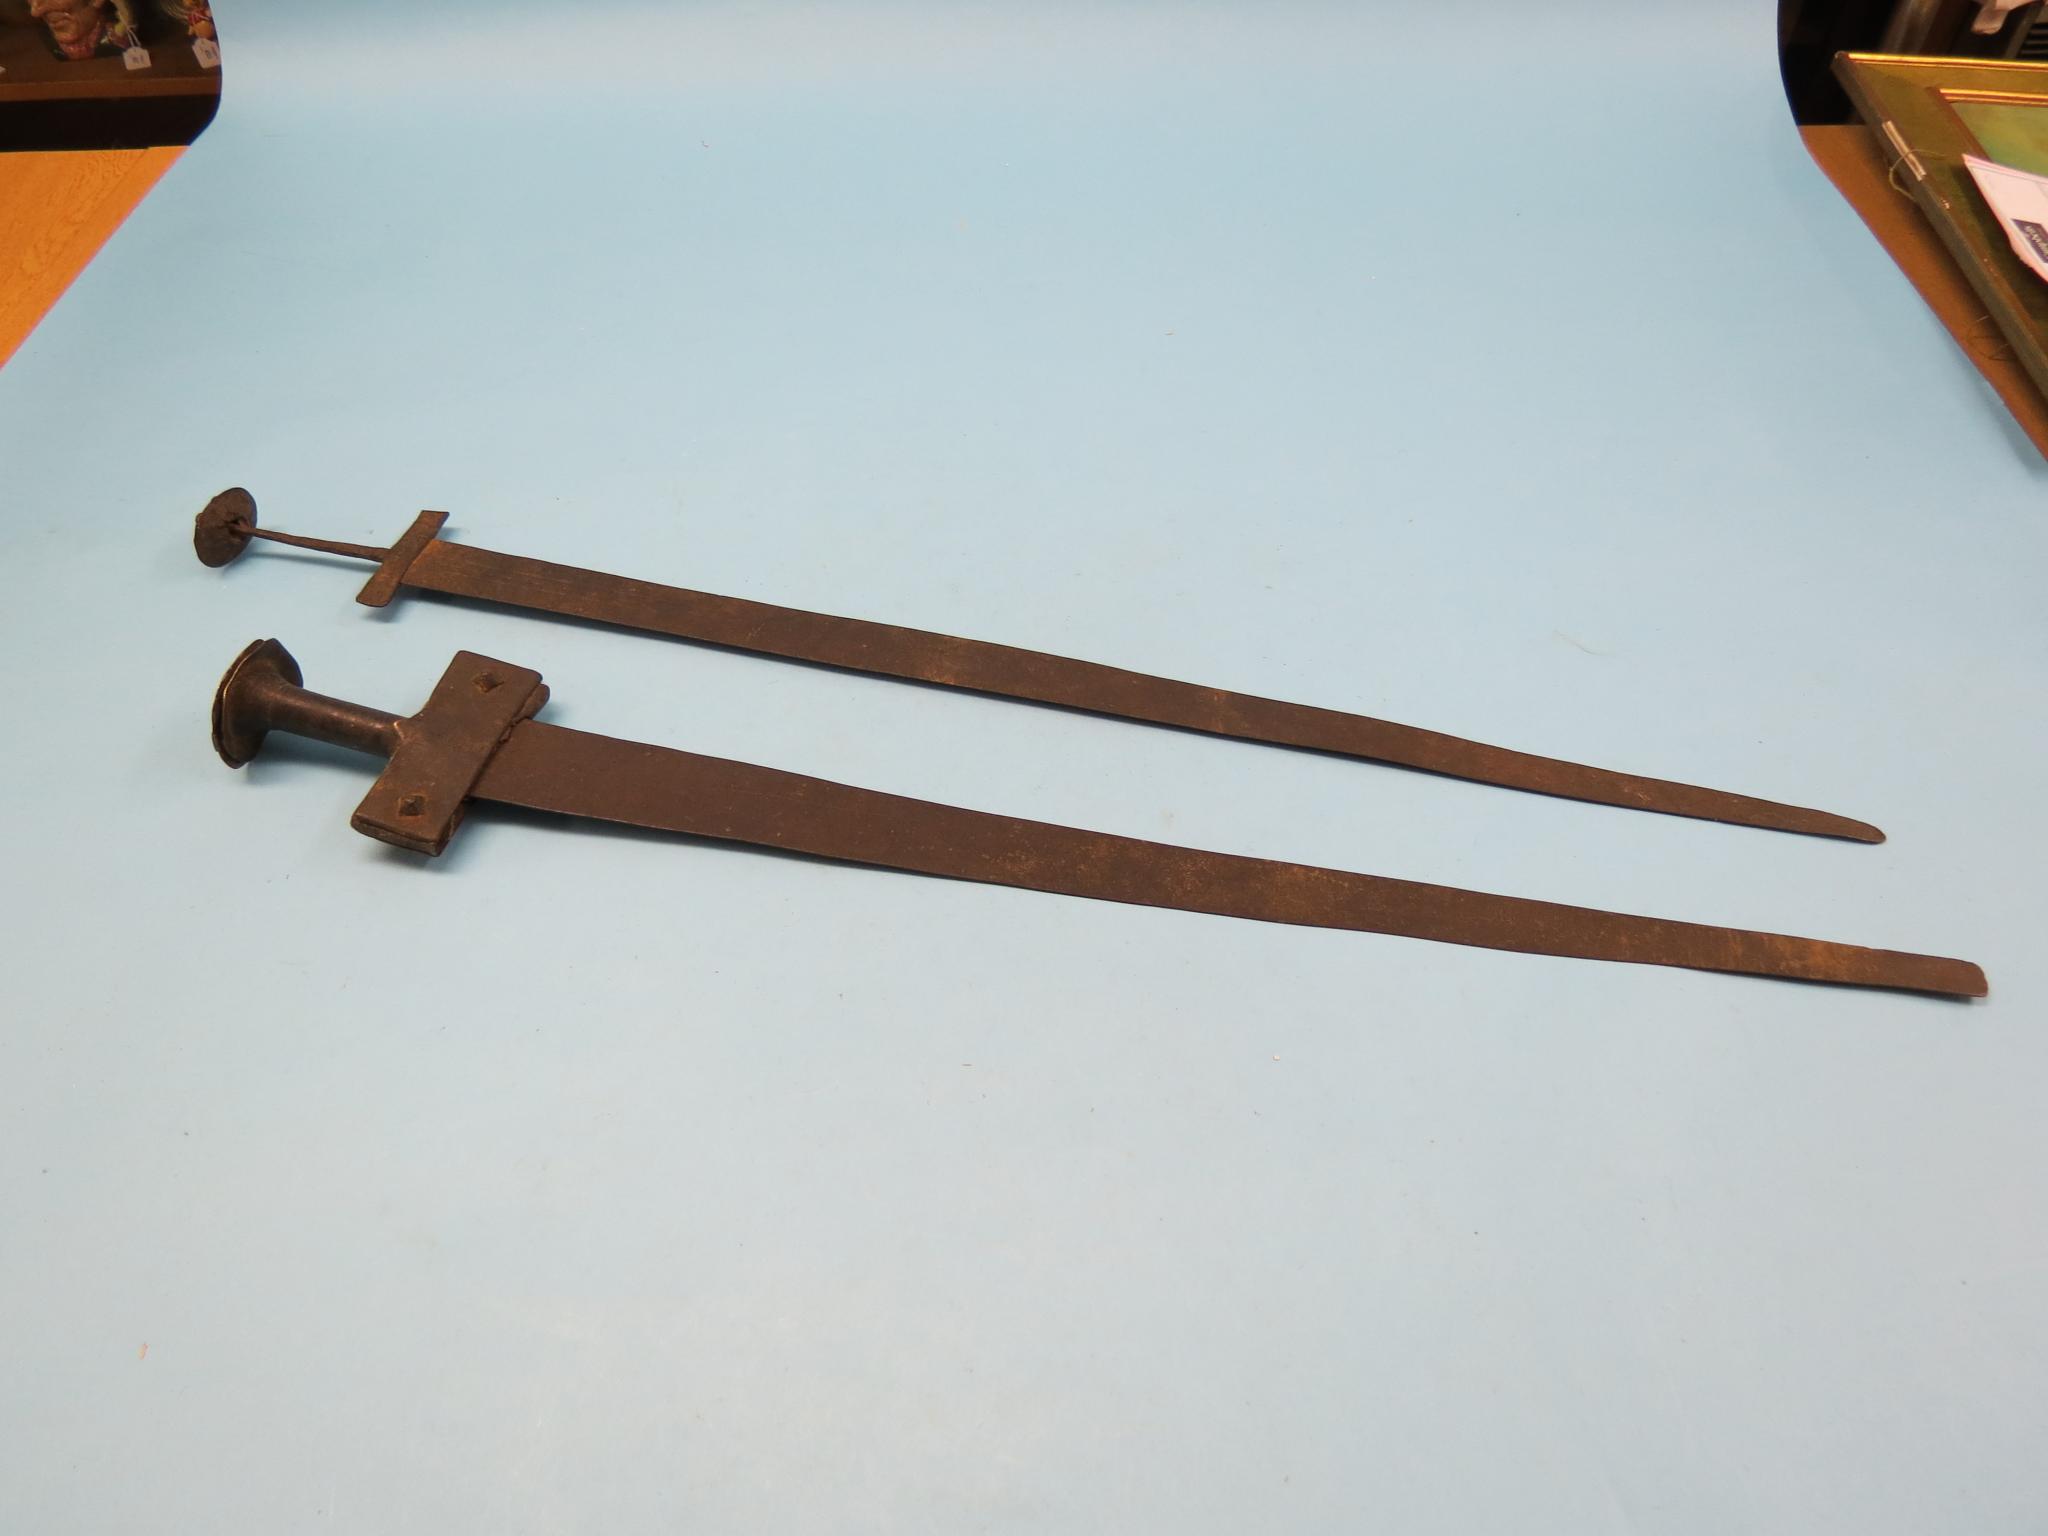 Two Sudanese iron swords, 31in. and 28in. blades, circa 1880